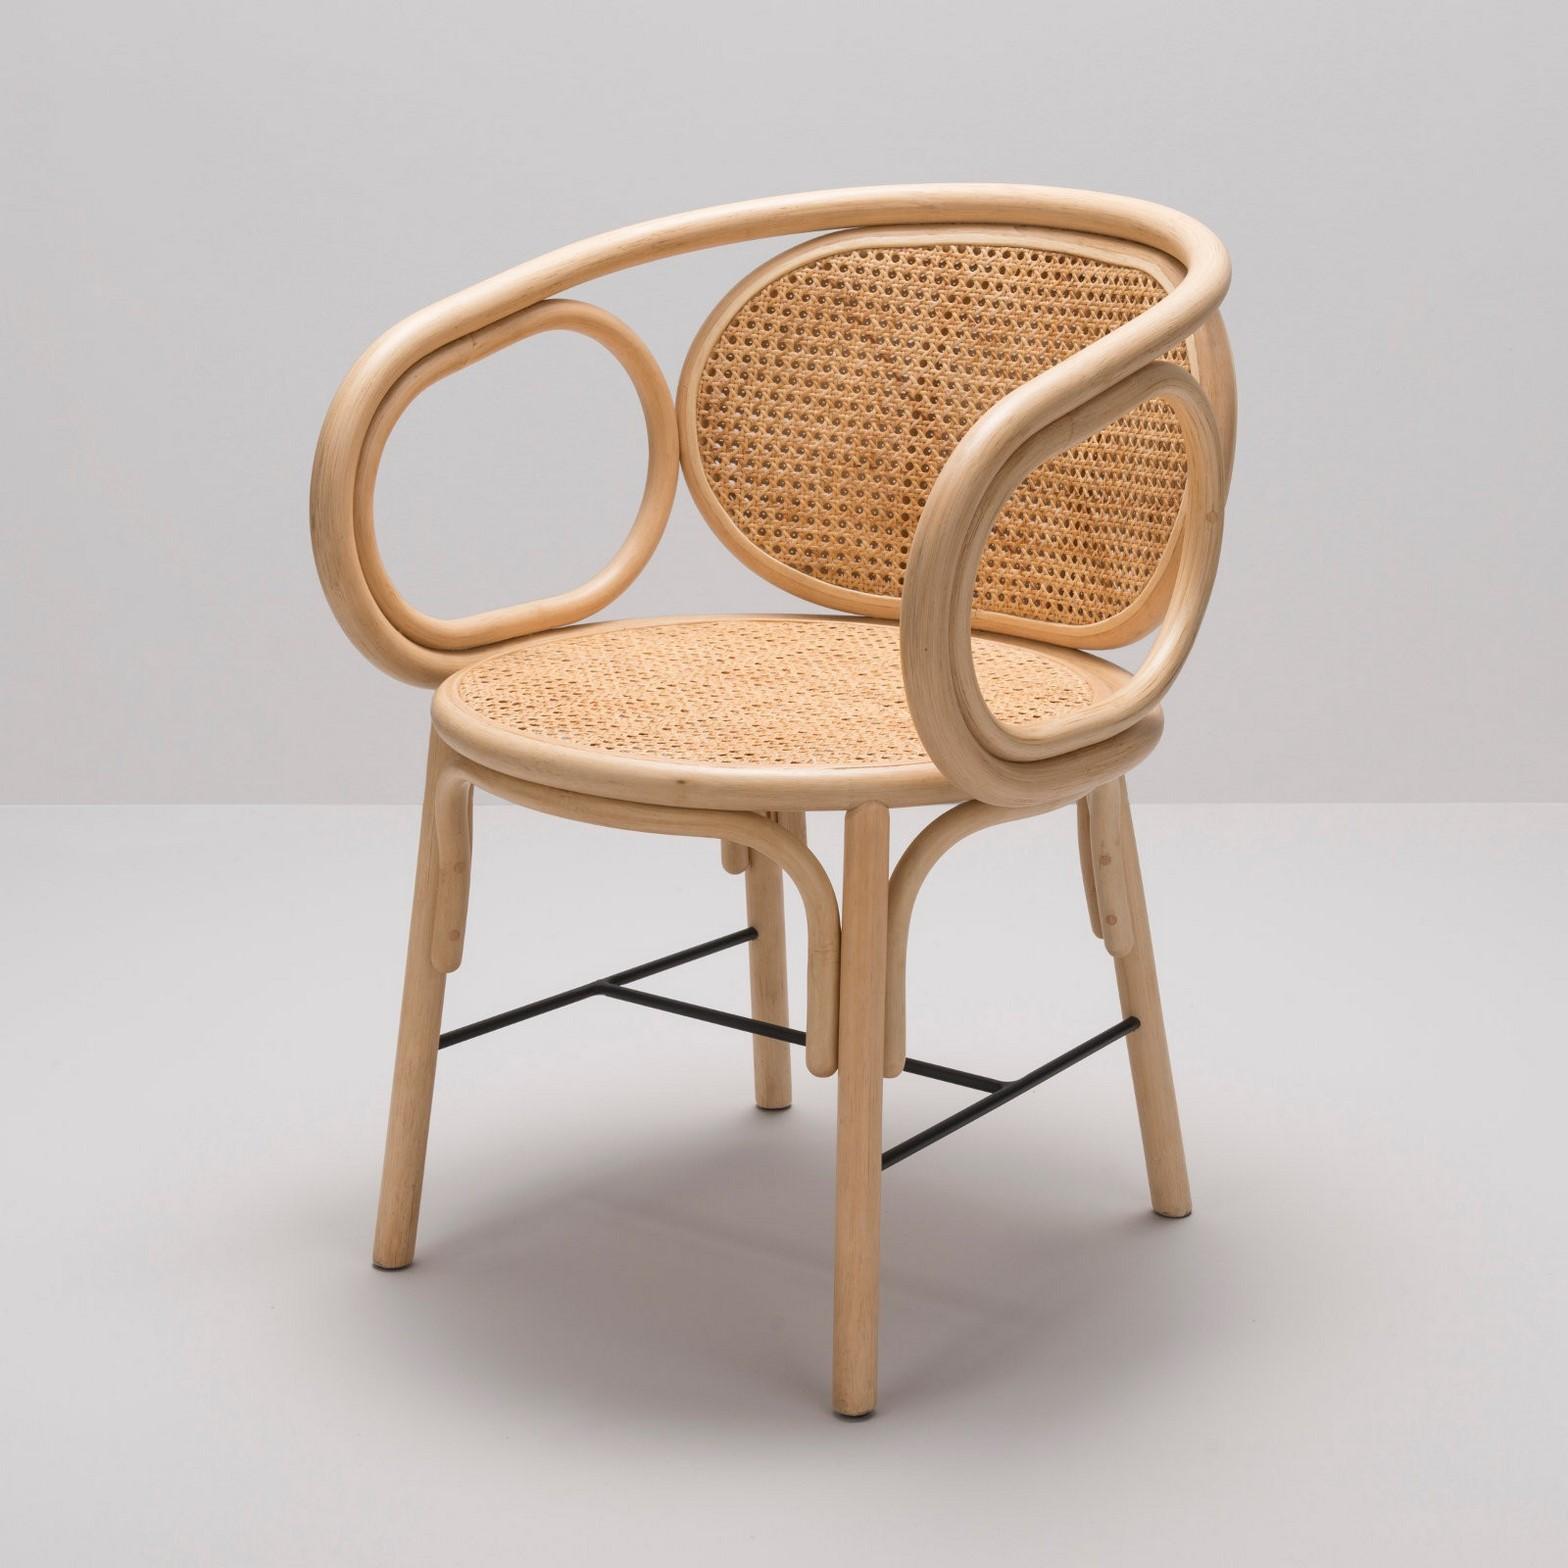 Rattan and woven cane armchair French modern design combining modernity and tradition, design lines, graphic and timelessness this armchair is composed of a robust rattan and airy structure, woven cane and back adorned with a comfy cushion.
Around